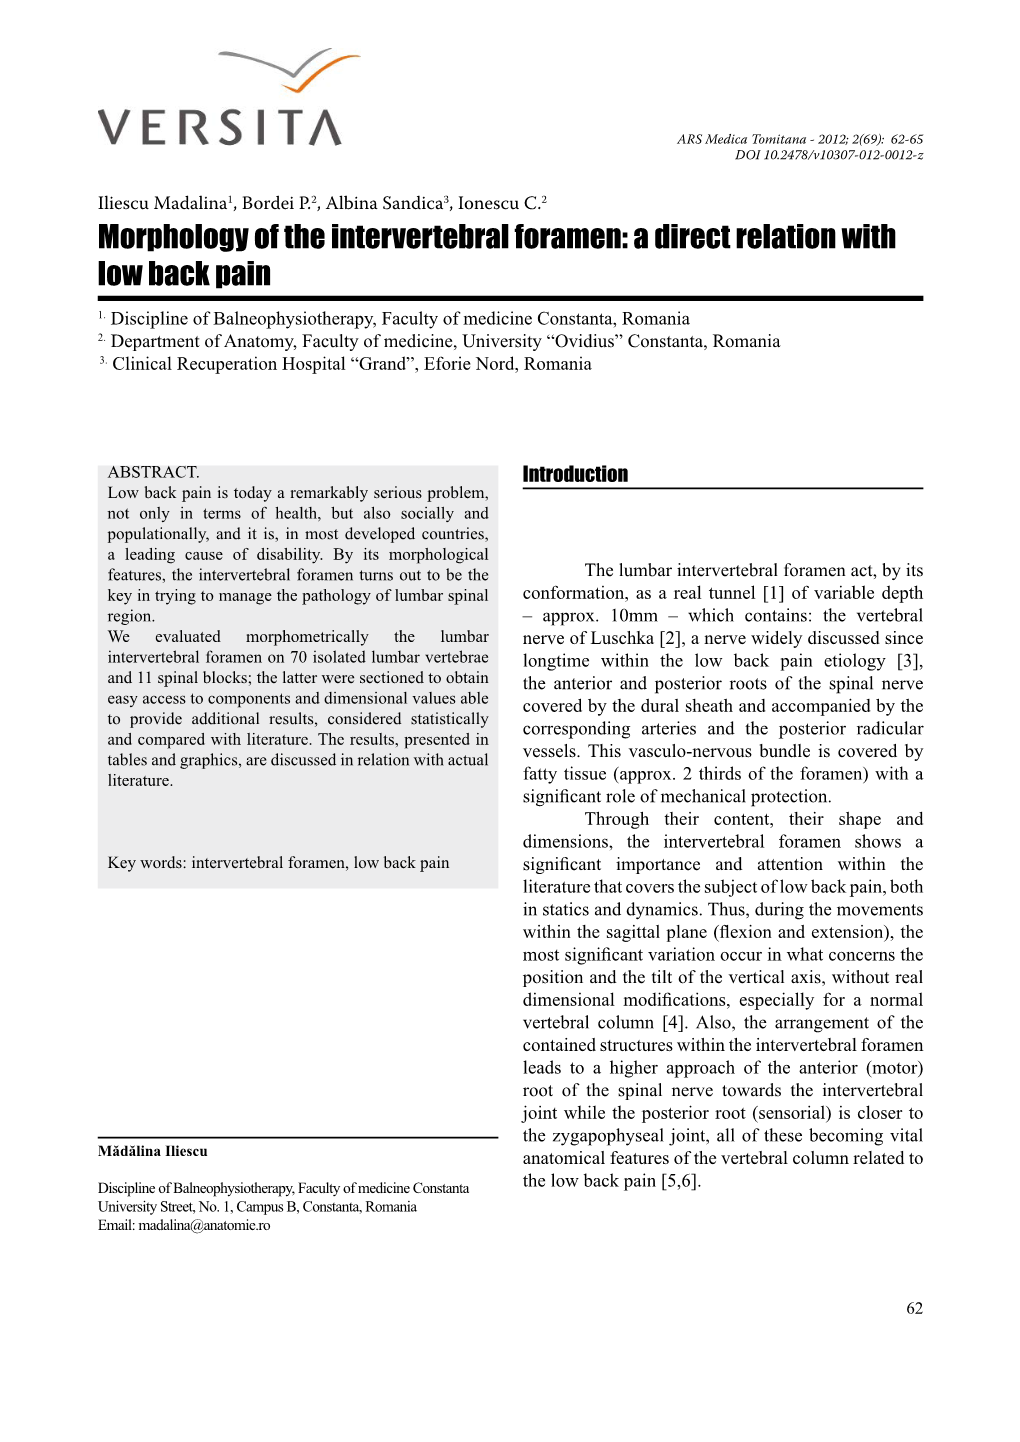 Morphology of the Intervertebral Foramen: a Direct Relation with Low Back Pain 1